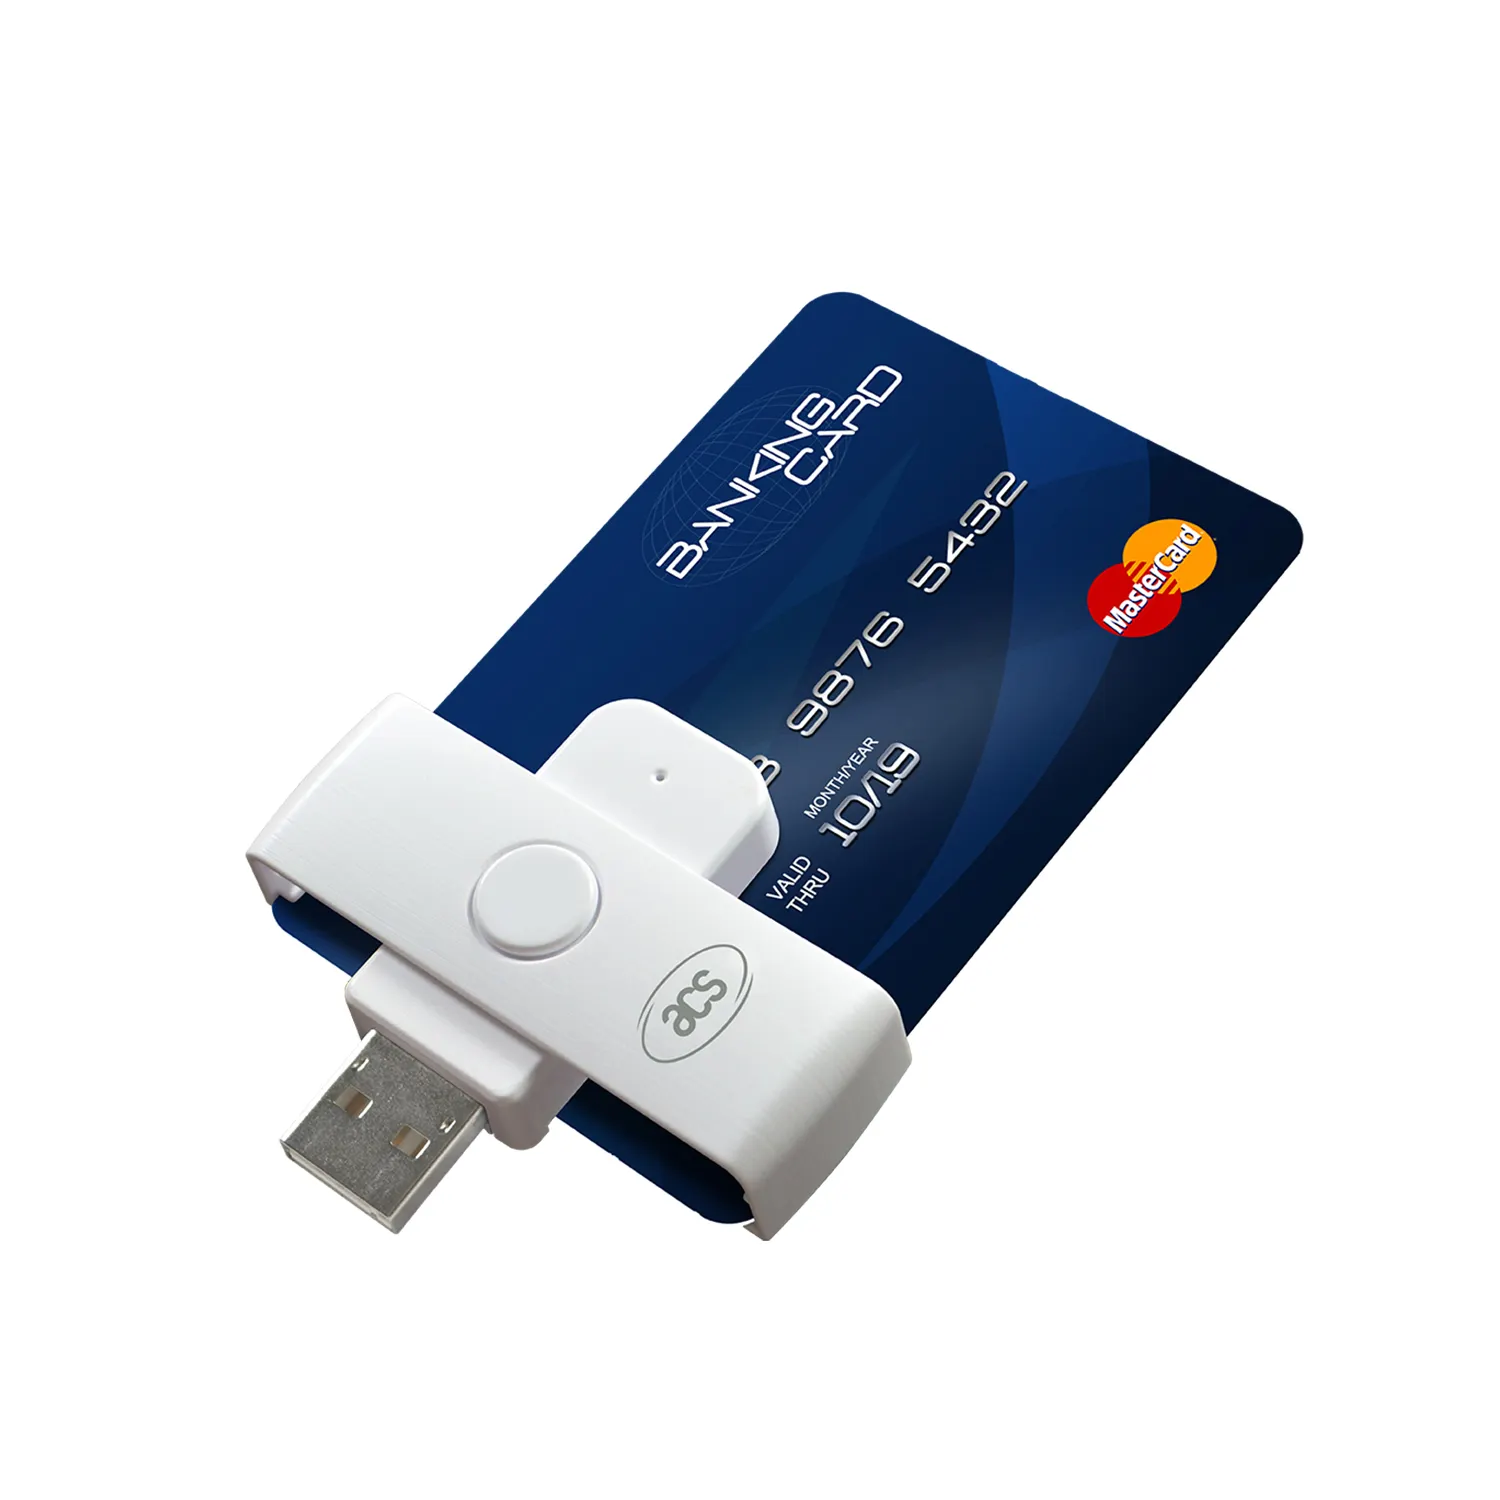 Small ISO 7816 USB Type A Smart Chip Card Reader Writer With Swivel ACR39U-N1